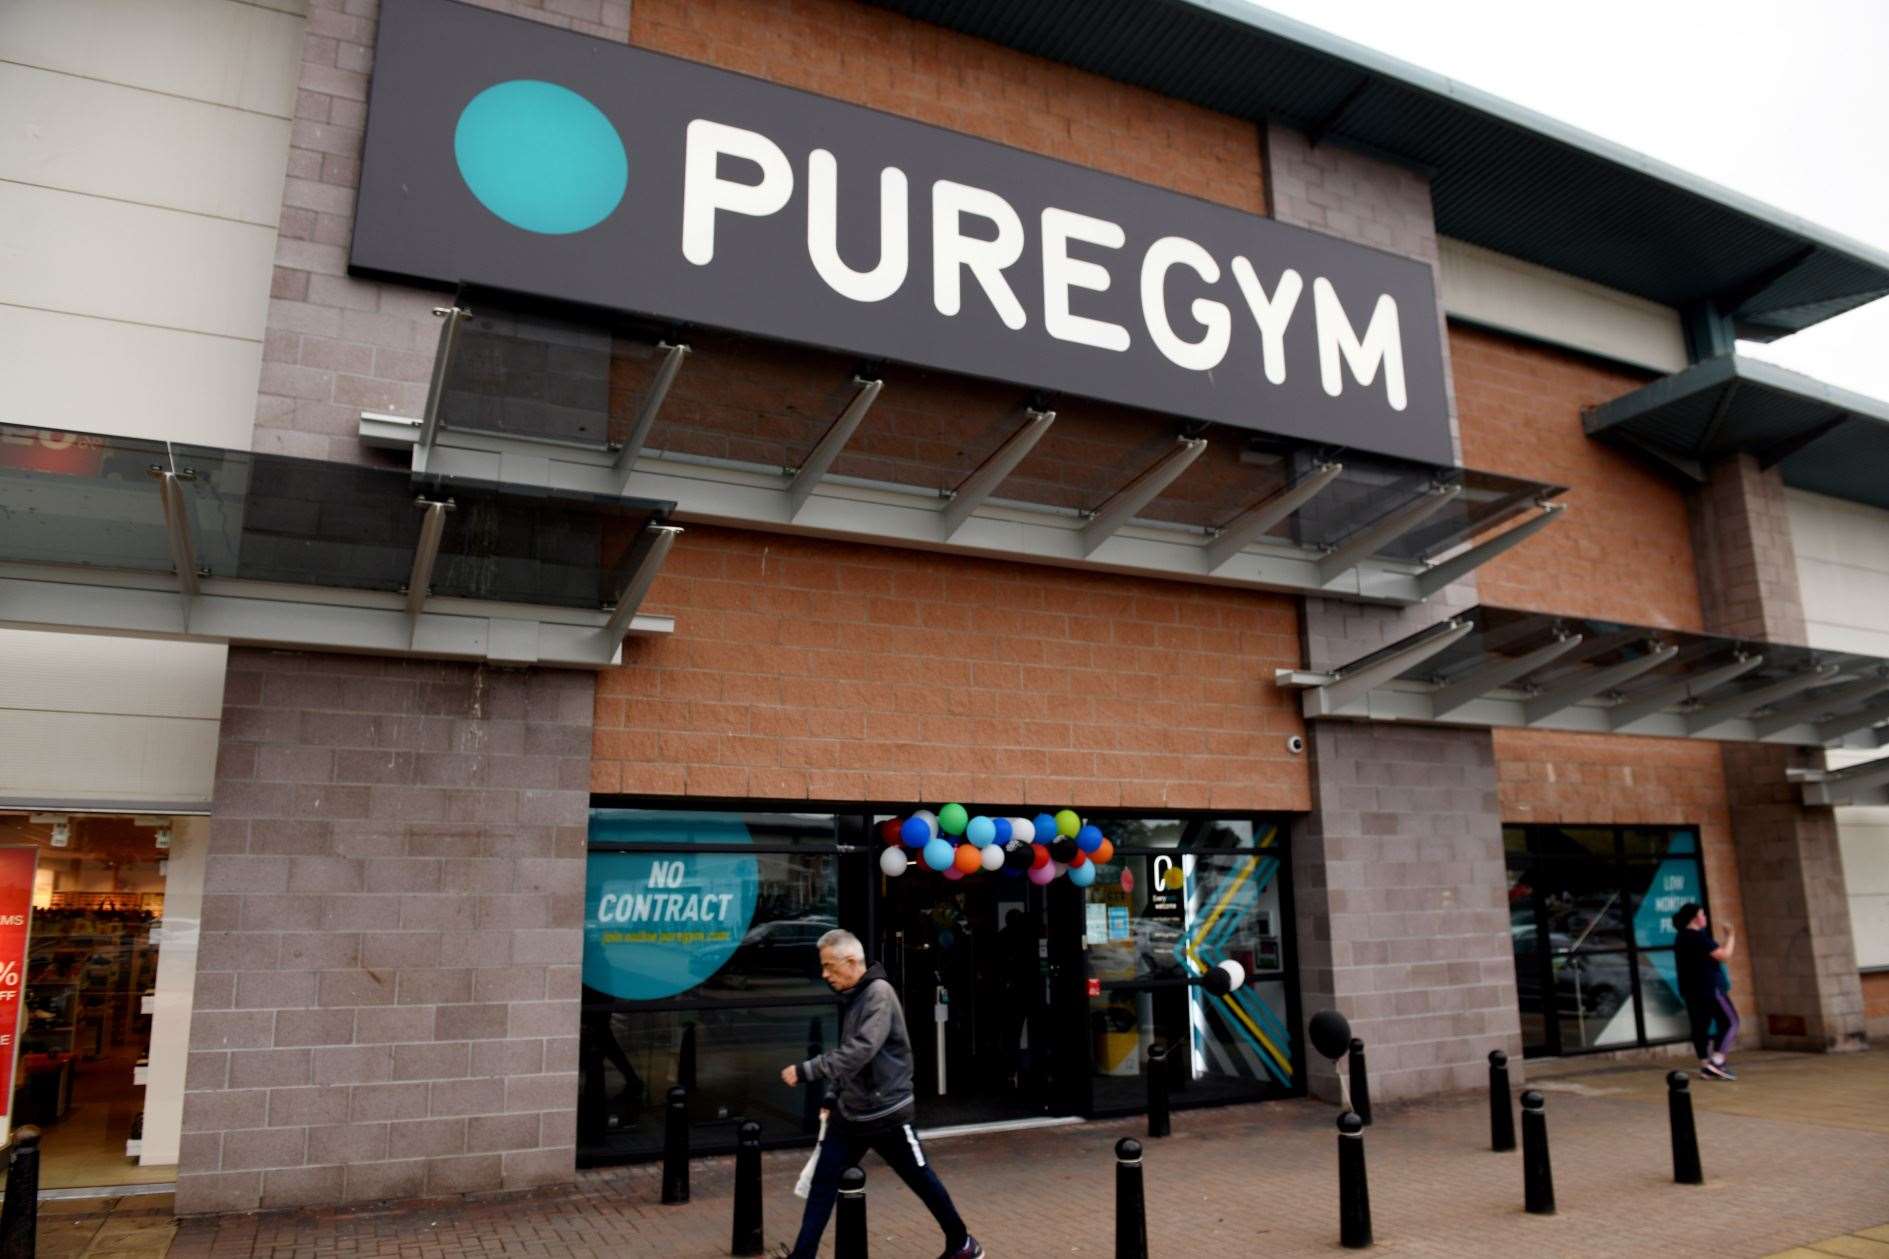 The challenge will take place at Pure Gym.